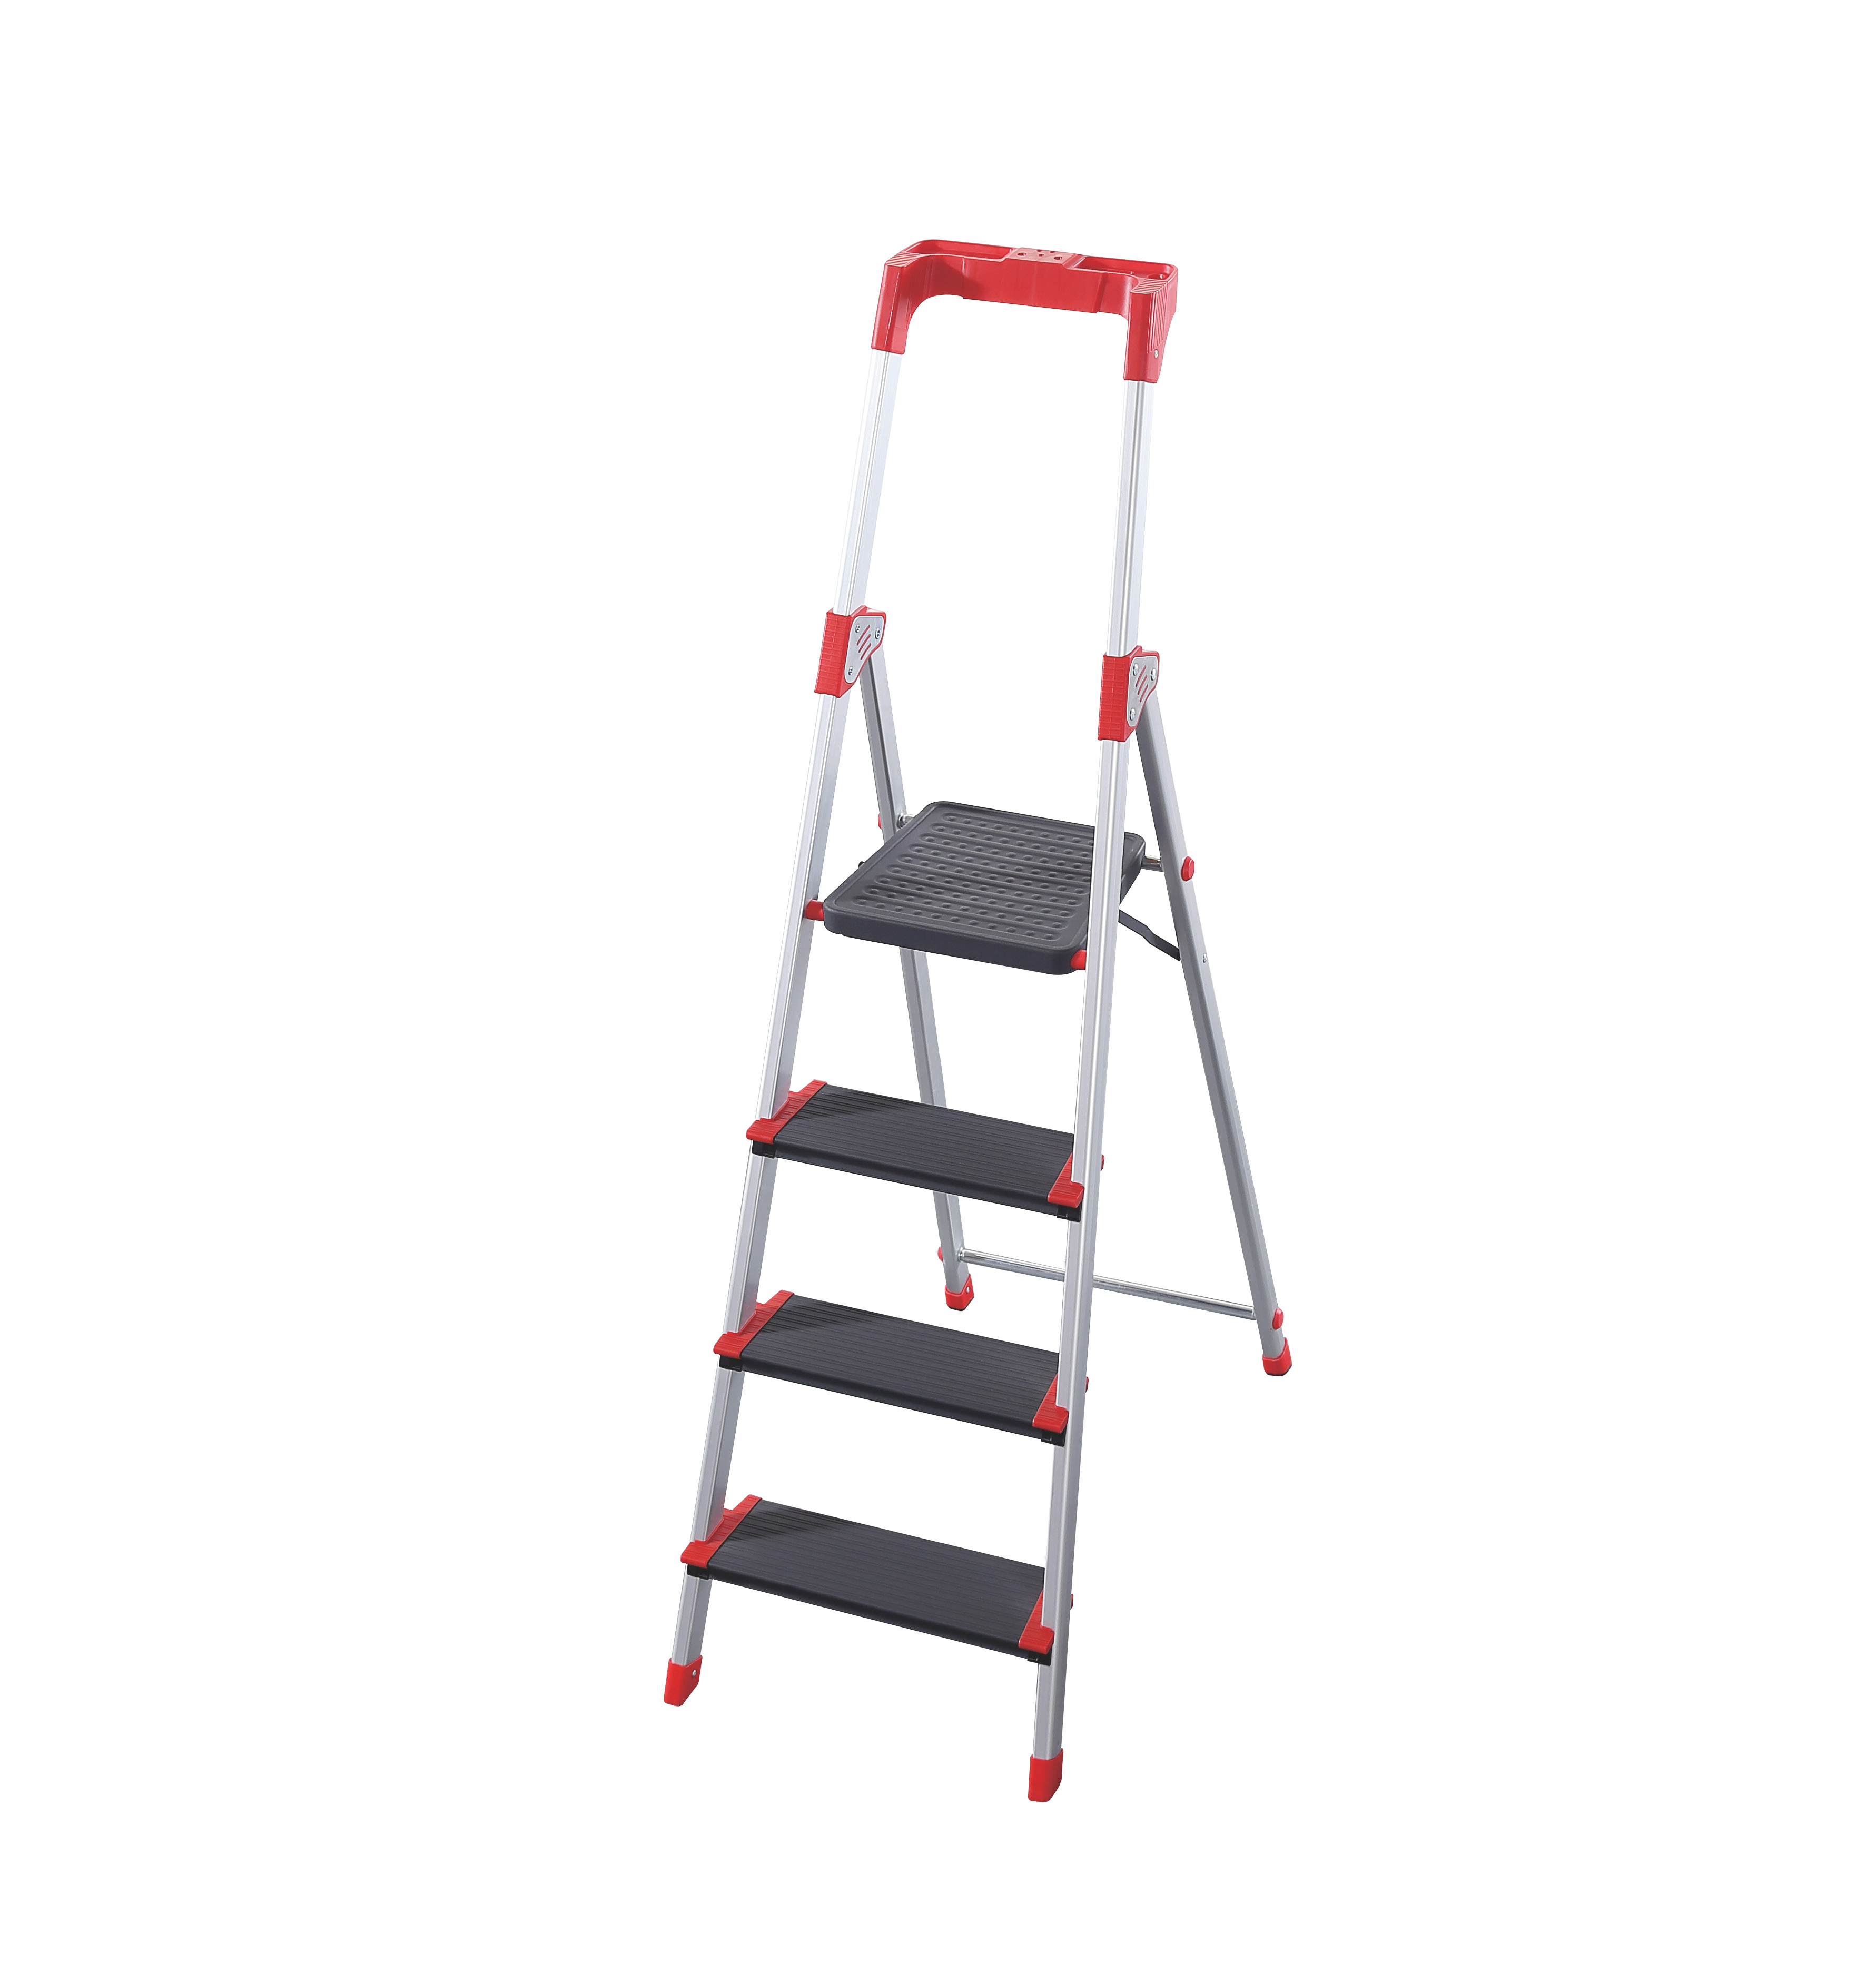 Aluminium 4 step household ladder with work tray